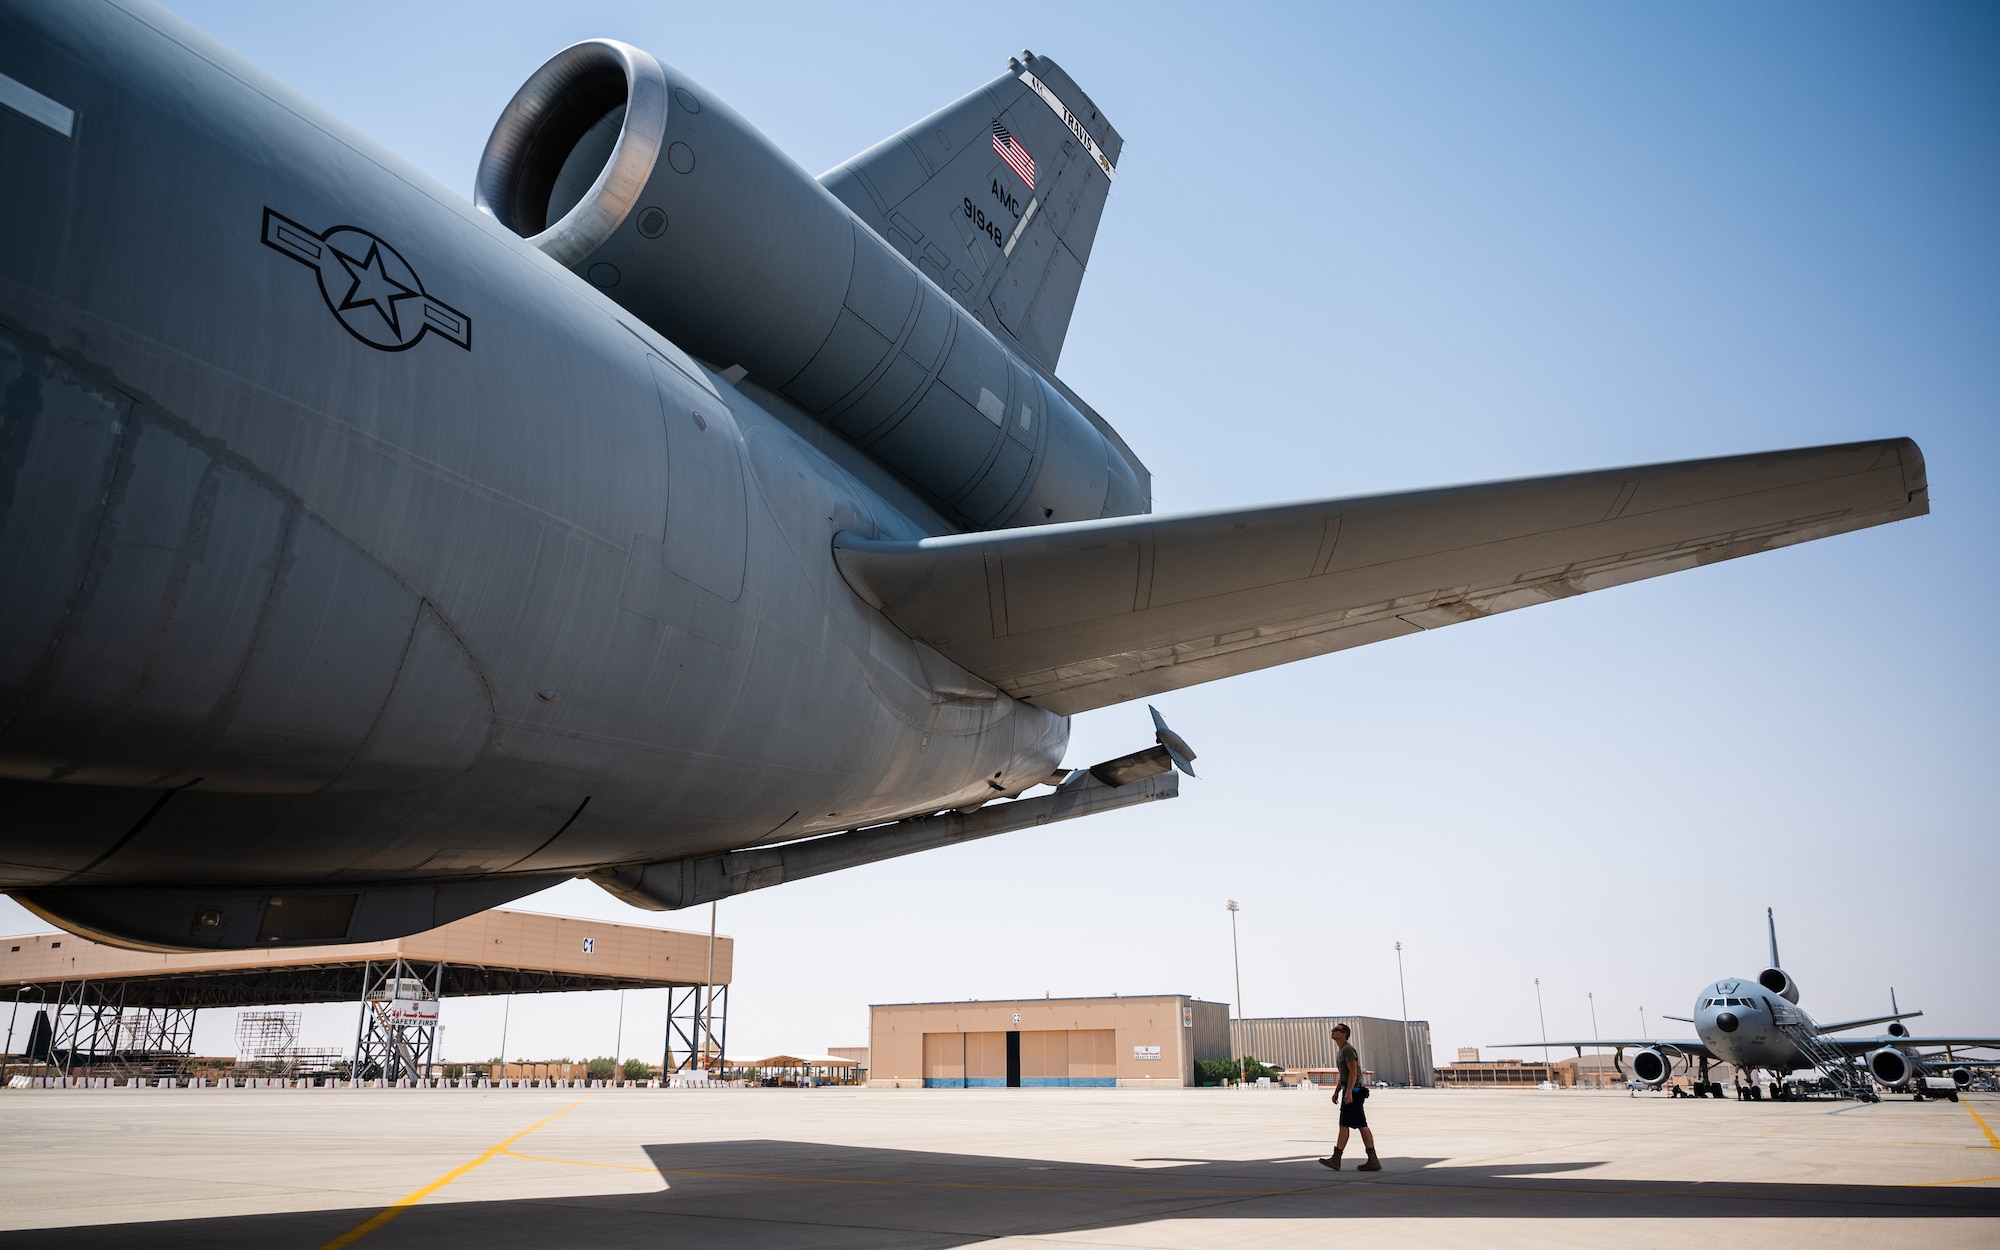 Airman 1st Class Seth Ambos, 908th Expeditionary Air Refueling Squadron crew chief, inspects a KC-10 Extender at Prince Sultan Air Base, Kingdom of Saudi Arabia, April 7, 2022. Airmen of the 908th EARS provide advanced tanker and cargo capabilities and can refuel U.S., ally and partner nation military aircraft. (U.S. Air Force photo by Senior Airman Jacob B. Wrightsman)